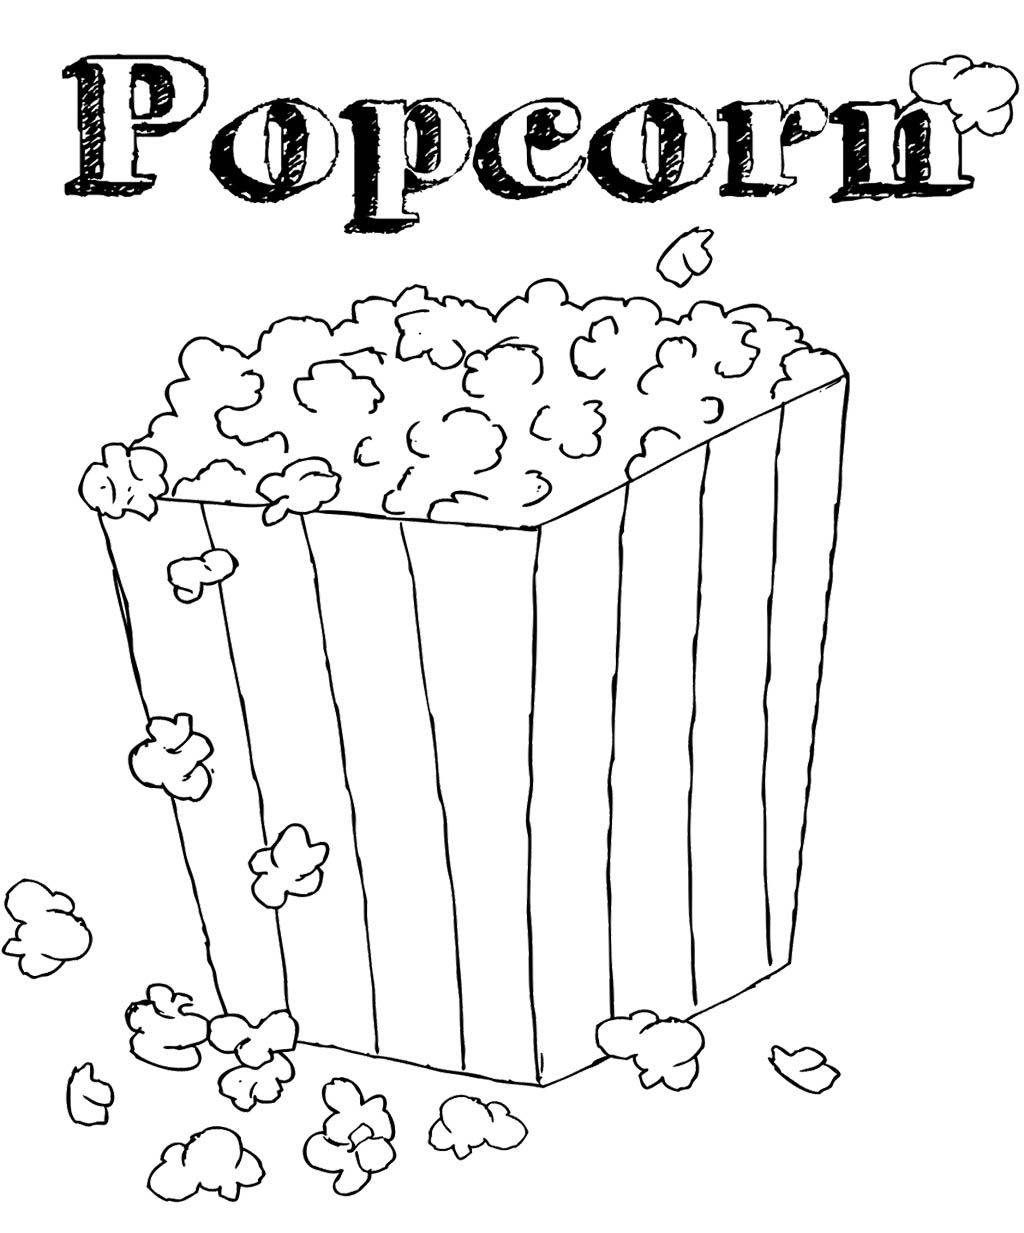 Coloring pages alphabet coloring page corn